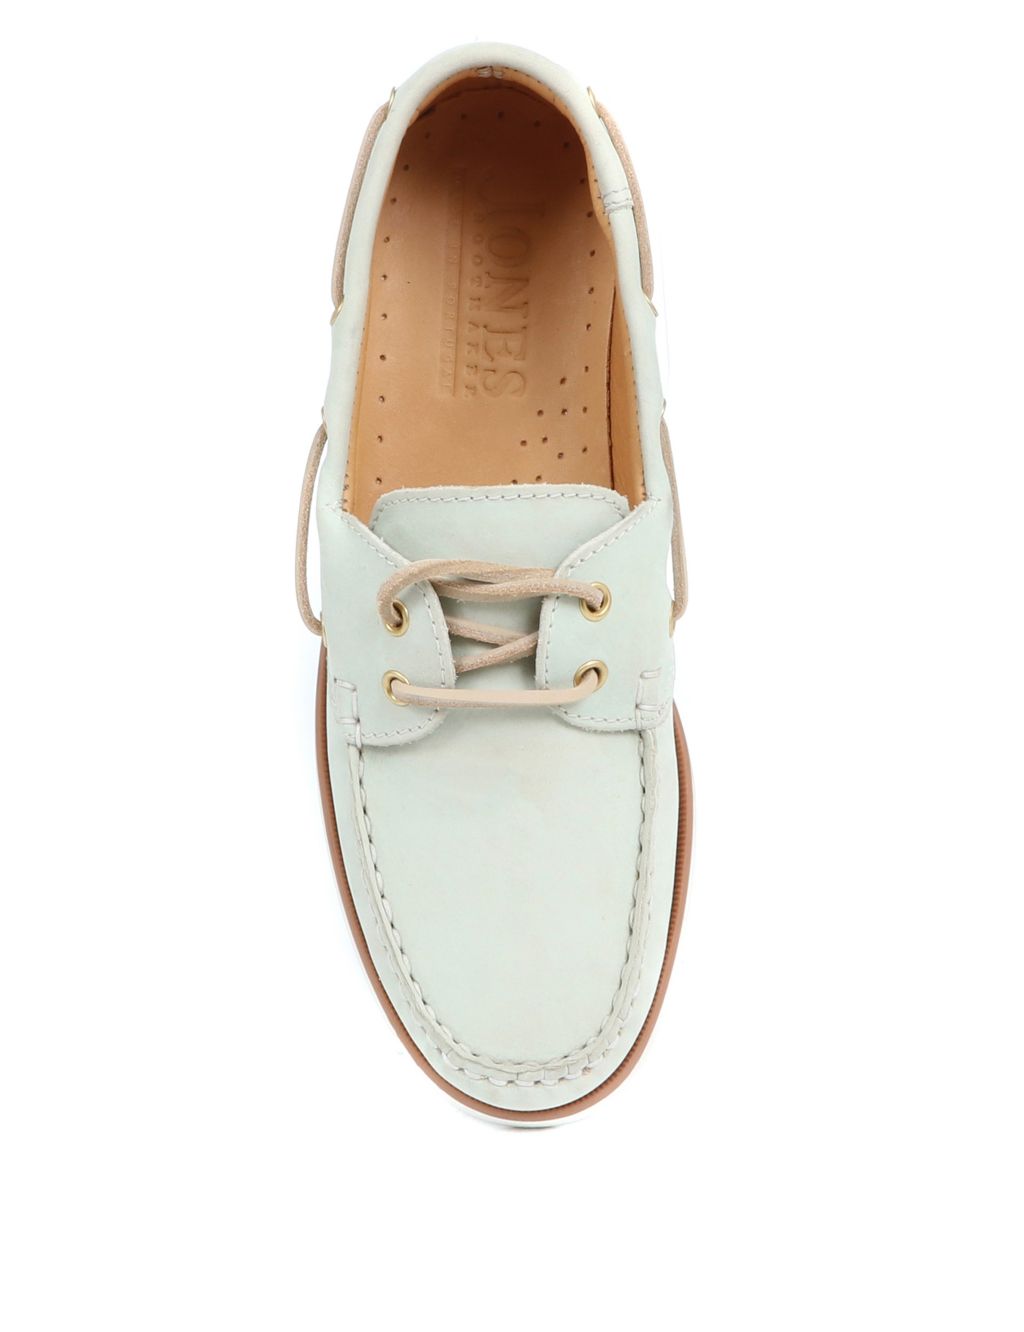 Leather Lace Up Slip On Boat Shoes image 4